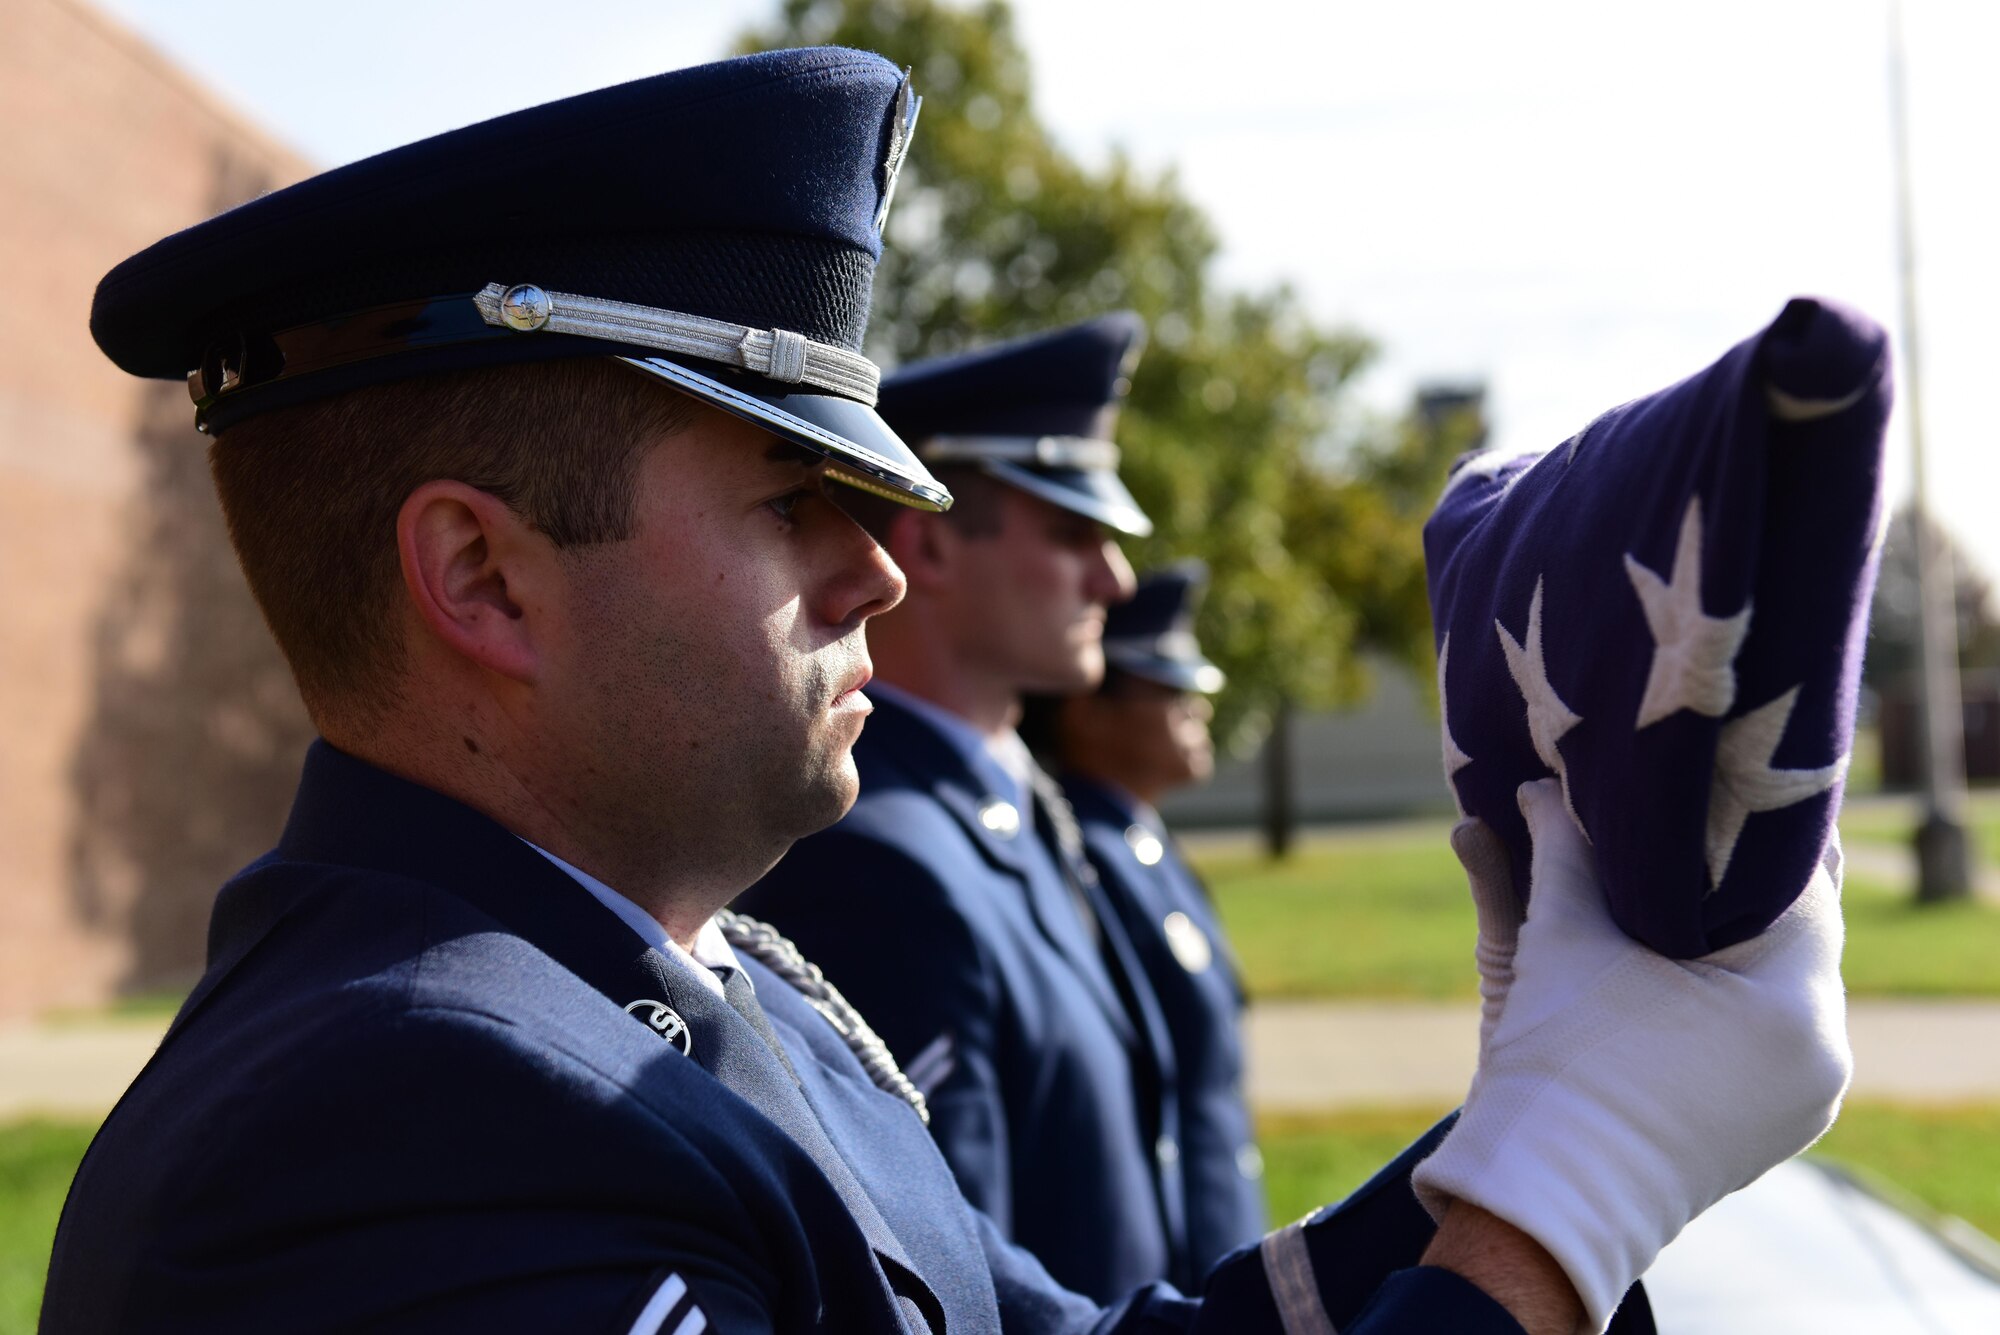 U.S. Air Force Senior Airman Jeffrey Pipkin, an A-team member of the Whiteman Air Force Base Honor Guard dresses a flag during a simulated funeral at Whiteman Air Force Base, Mo., Nov. 2, 2016. Made up of members from different units throughout the base, the Whiteman Honor Guard performs funeral and military honors in support of 99 counties in Missouri and 19 counties in Kansas, covering more than 70,000 square miles, one of the biggest areas of responsibility in all of Air Force Global Strike Command. (U.S. Air Force photo by Senior Airman Joel Pfiester)